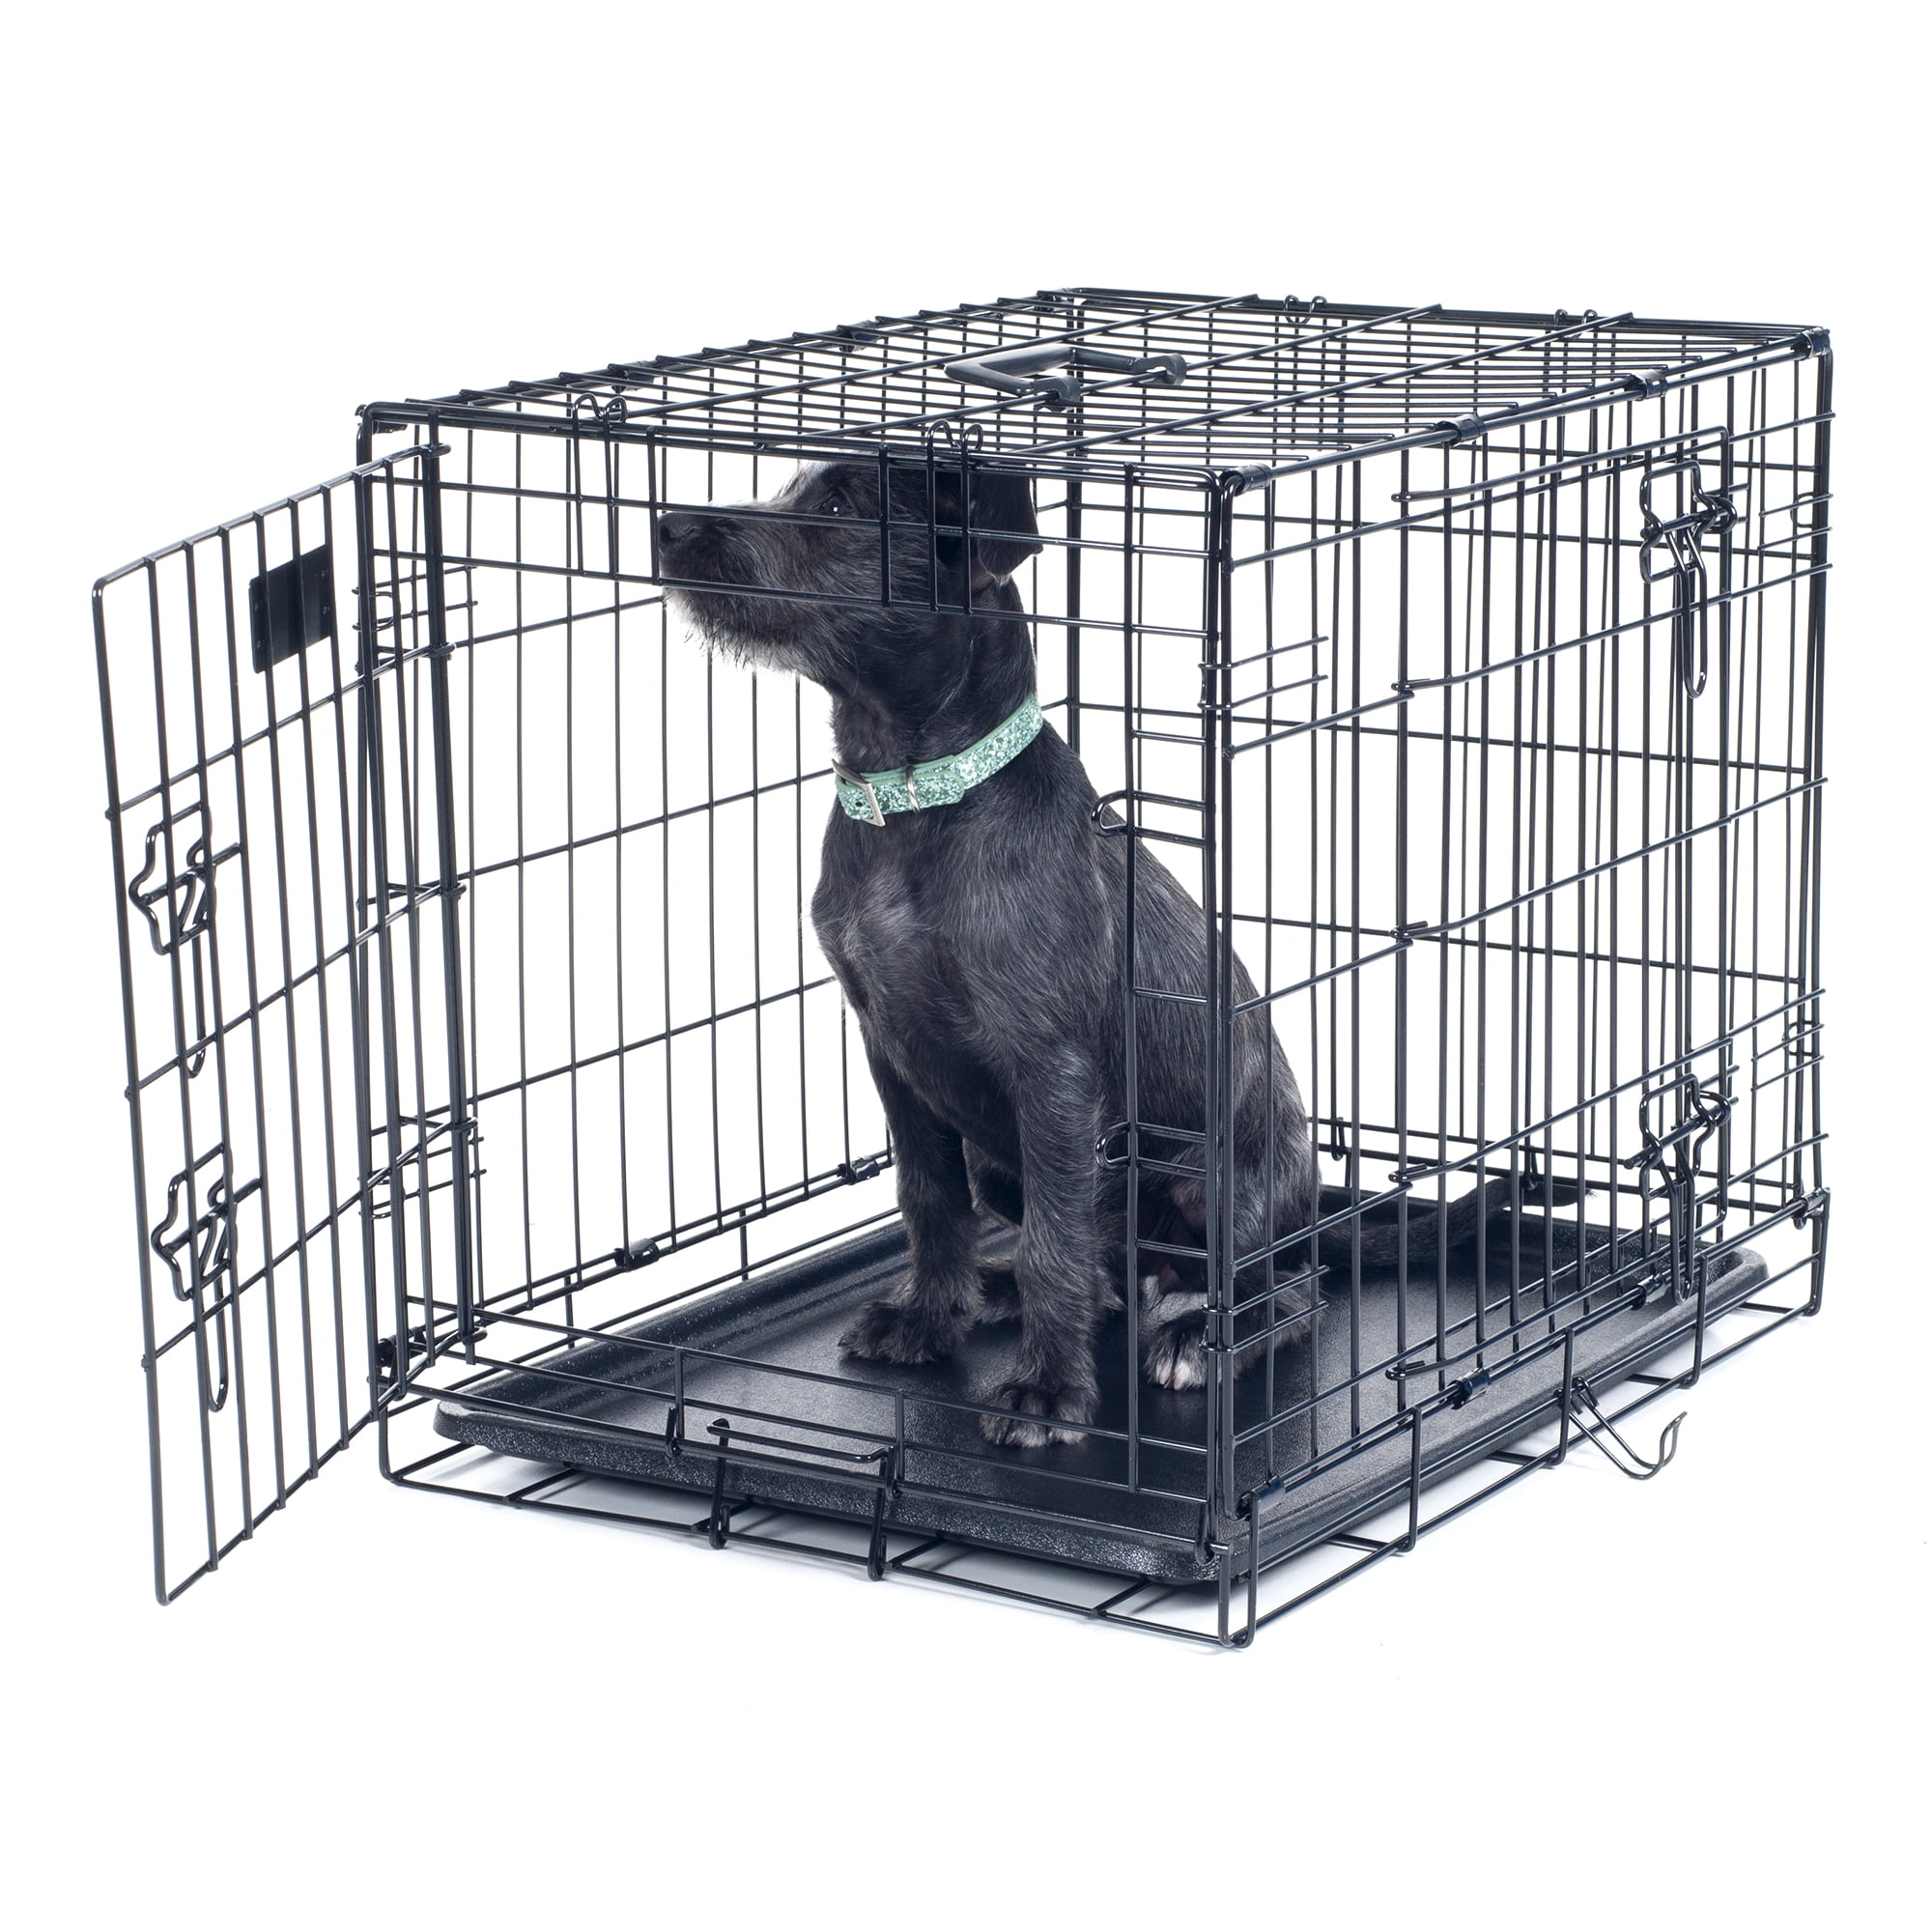 Brand New Sealed Box 30 2 Door Dog Crate & Tray Med'lrg Dog Cat Cage  $50/Bed Or Blankets $10 Pet Supplies Jaulas De Mascota Toys Leashes &  Harnesses for Sale in Fontana